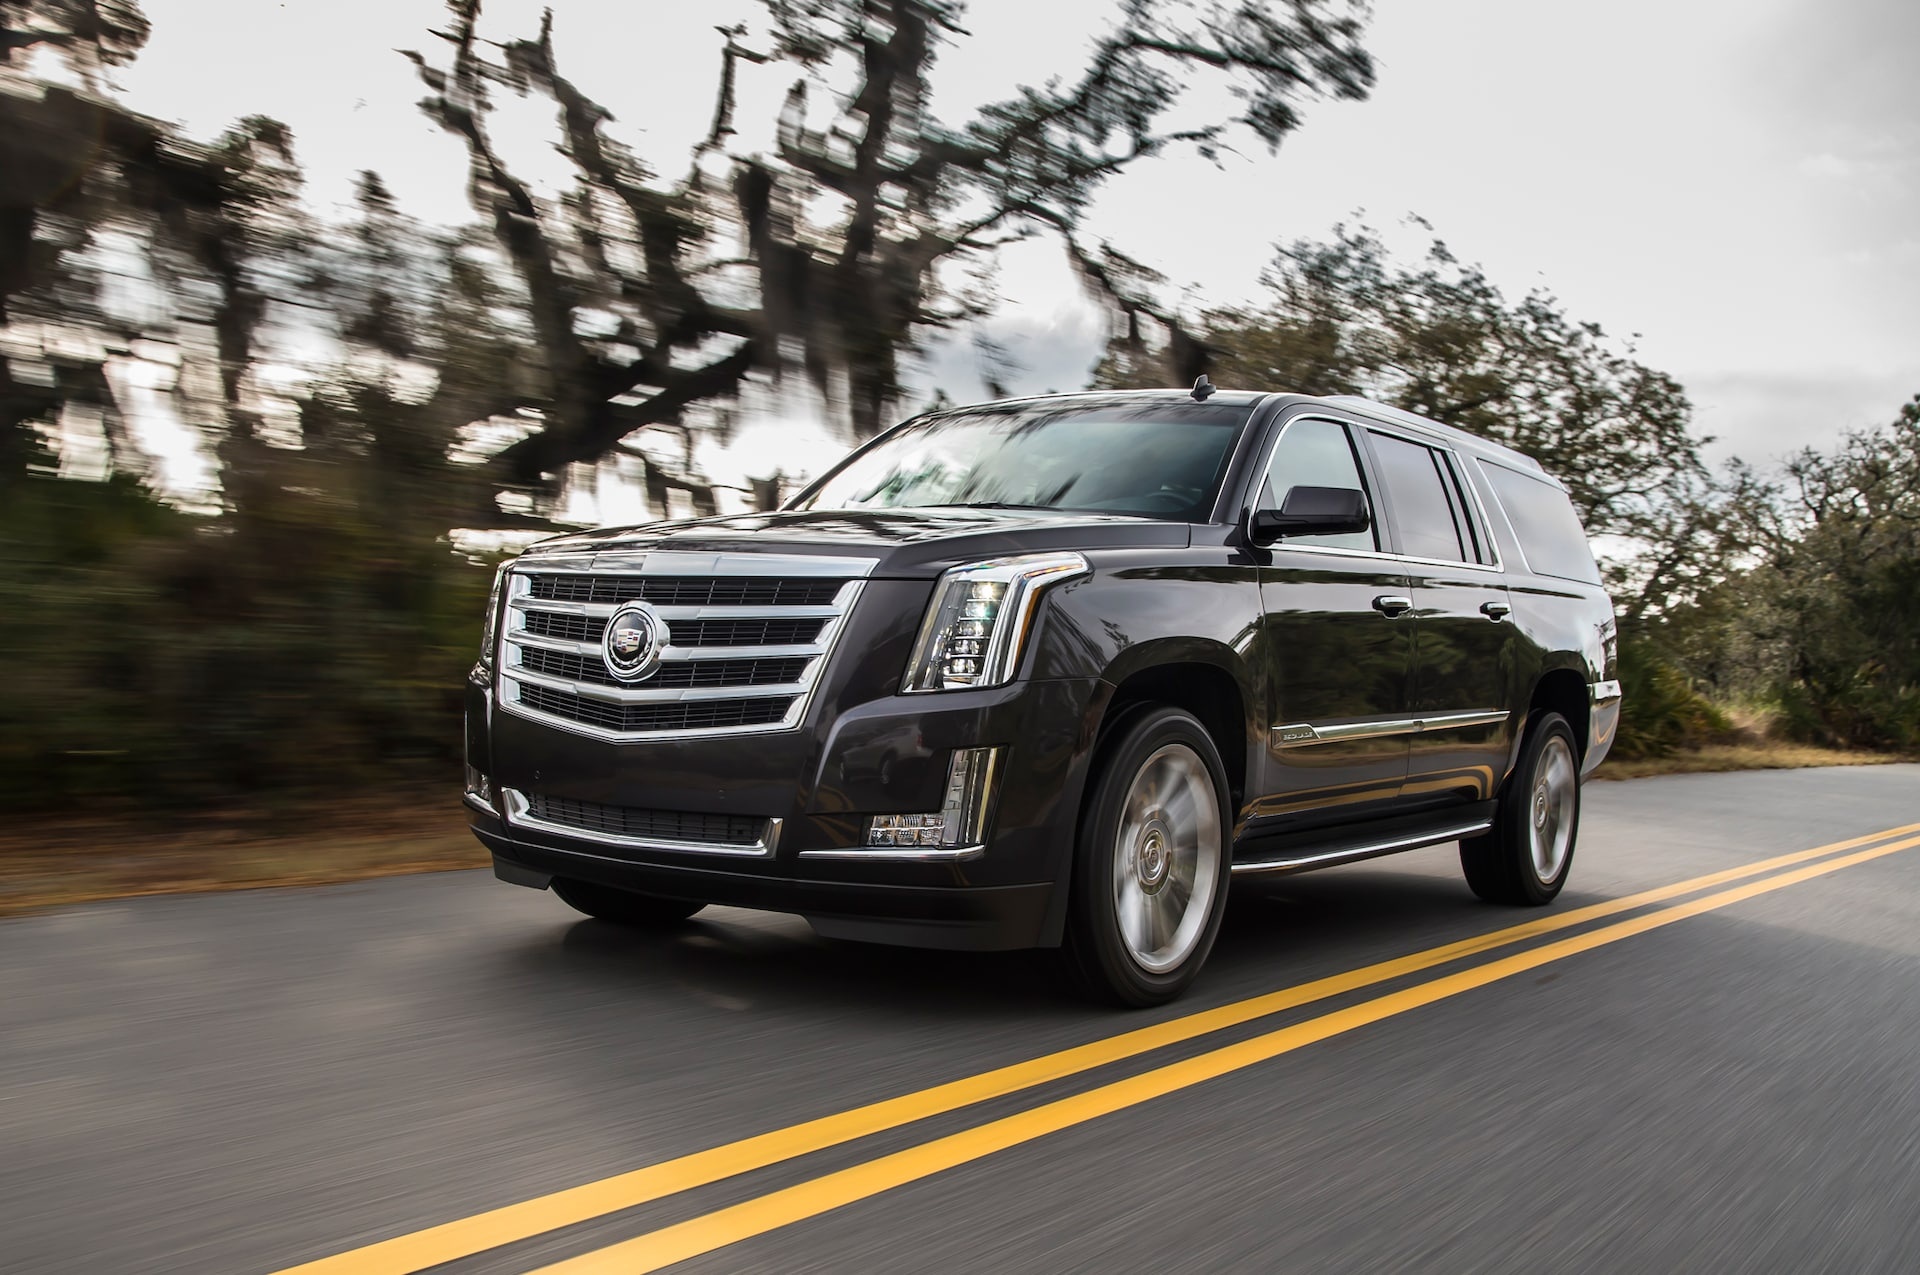 Cadillac Escalade, 2015 model, First test, SUV review, 1920x1280 HD Desktop